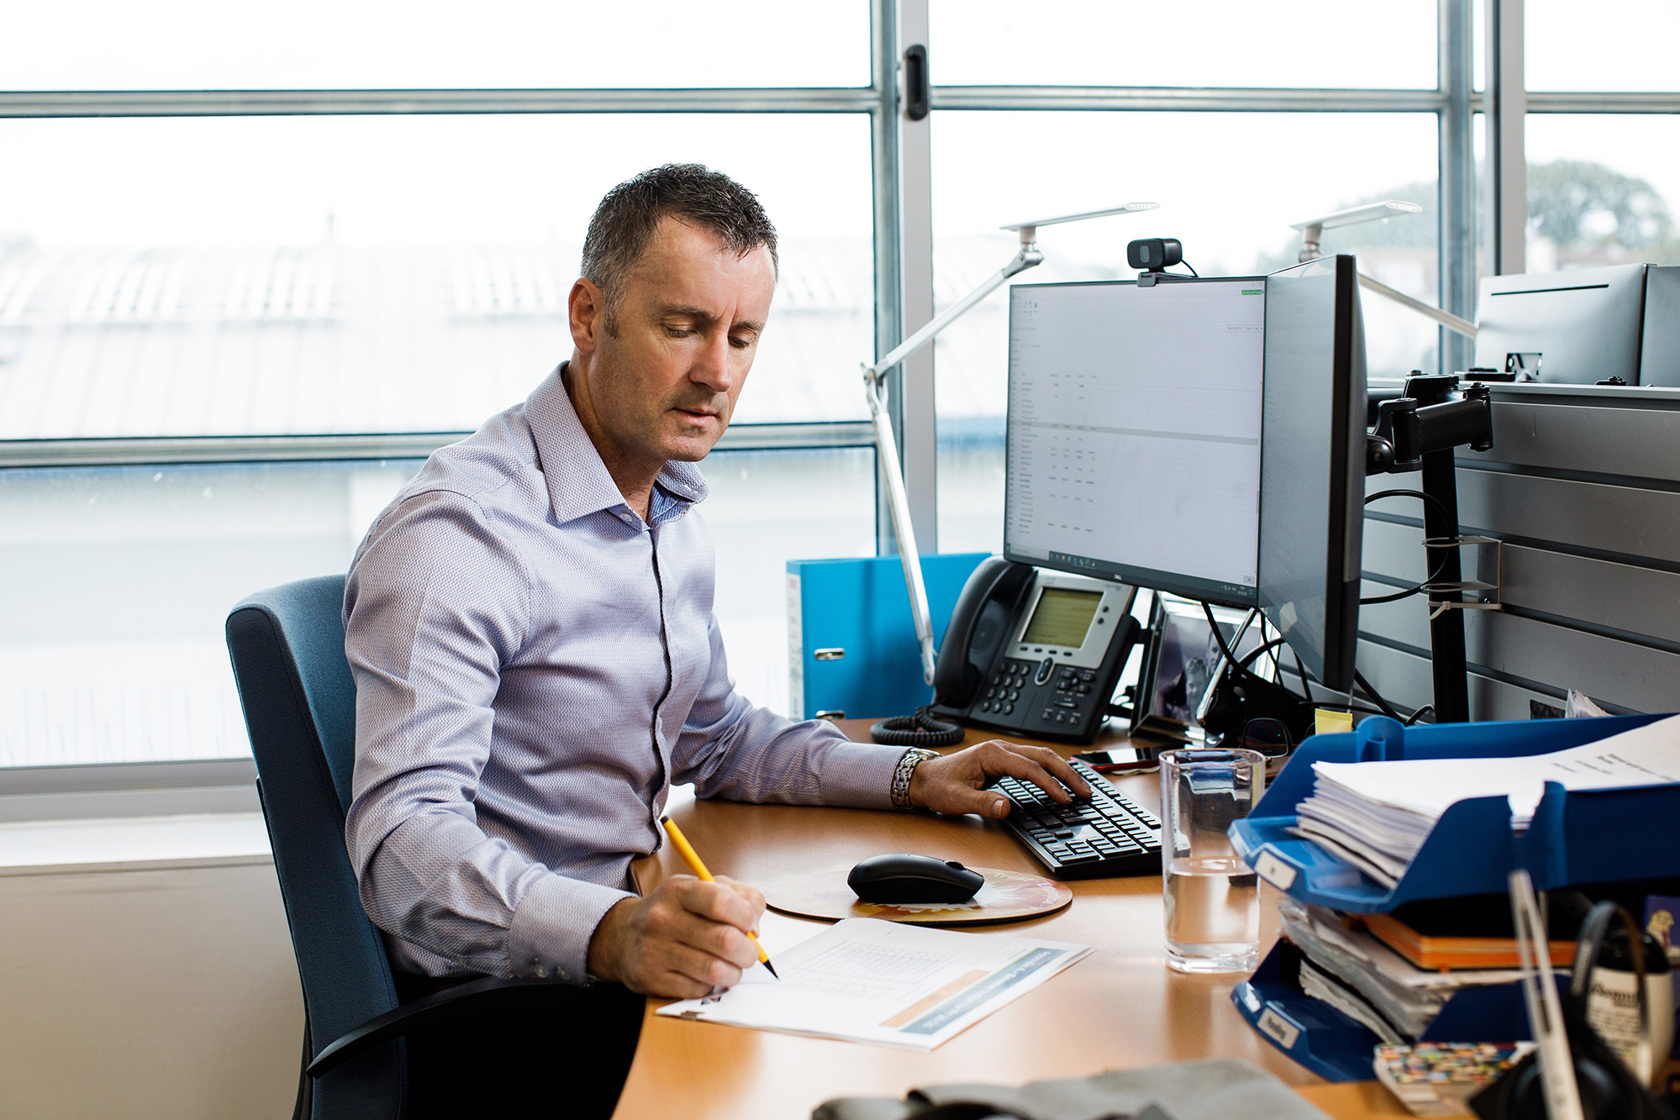 Andy Kemp works at his desk at the Jersey Electricy offices.